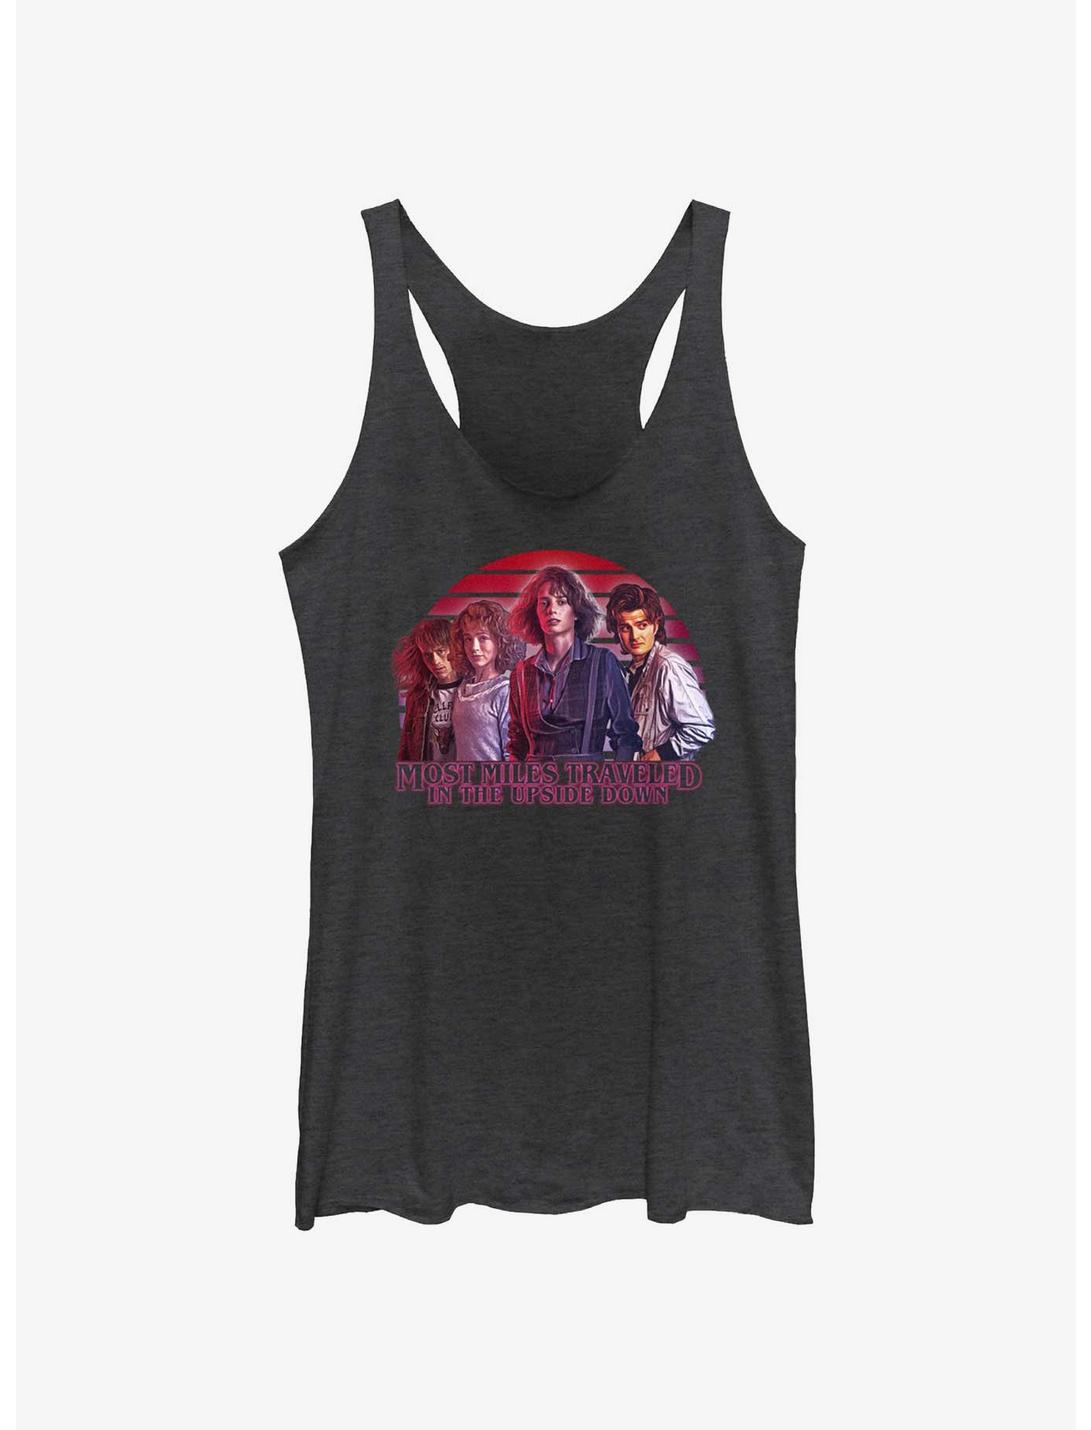 Stranger Things Most Miles Traveled In The Upside Down Womens Tank Top, BLK HTR, hi-res